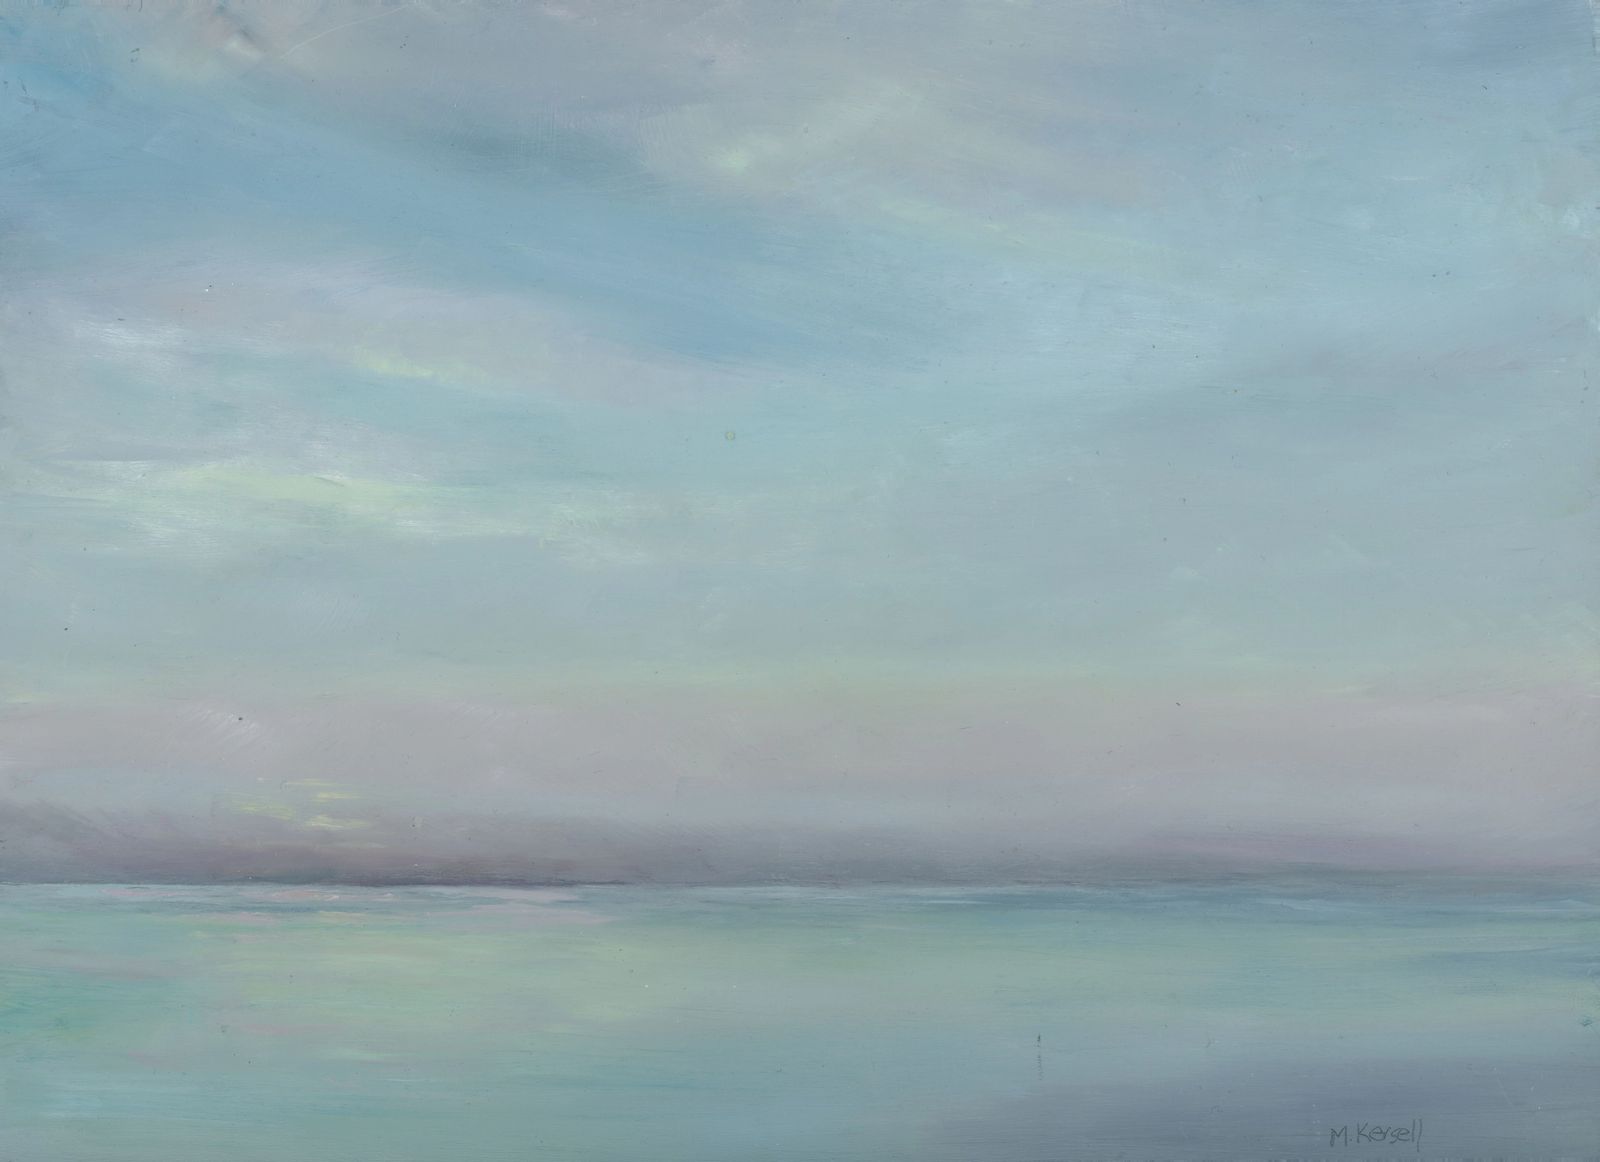 This oil painting on panel depicts a soft pink and salmon twilight sunset reflected in a very calm ocean.